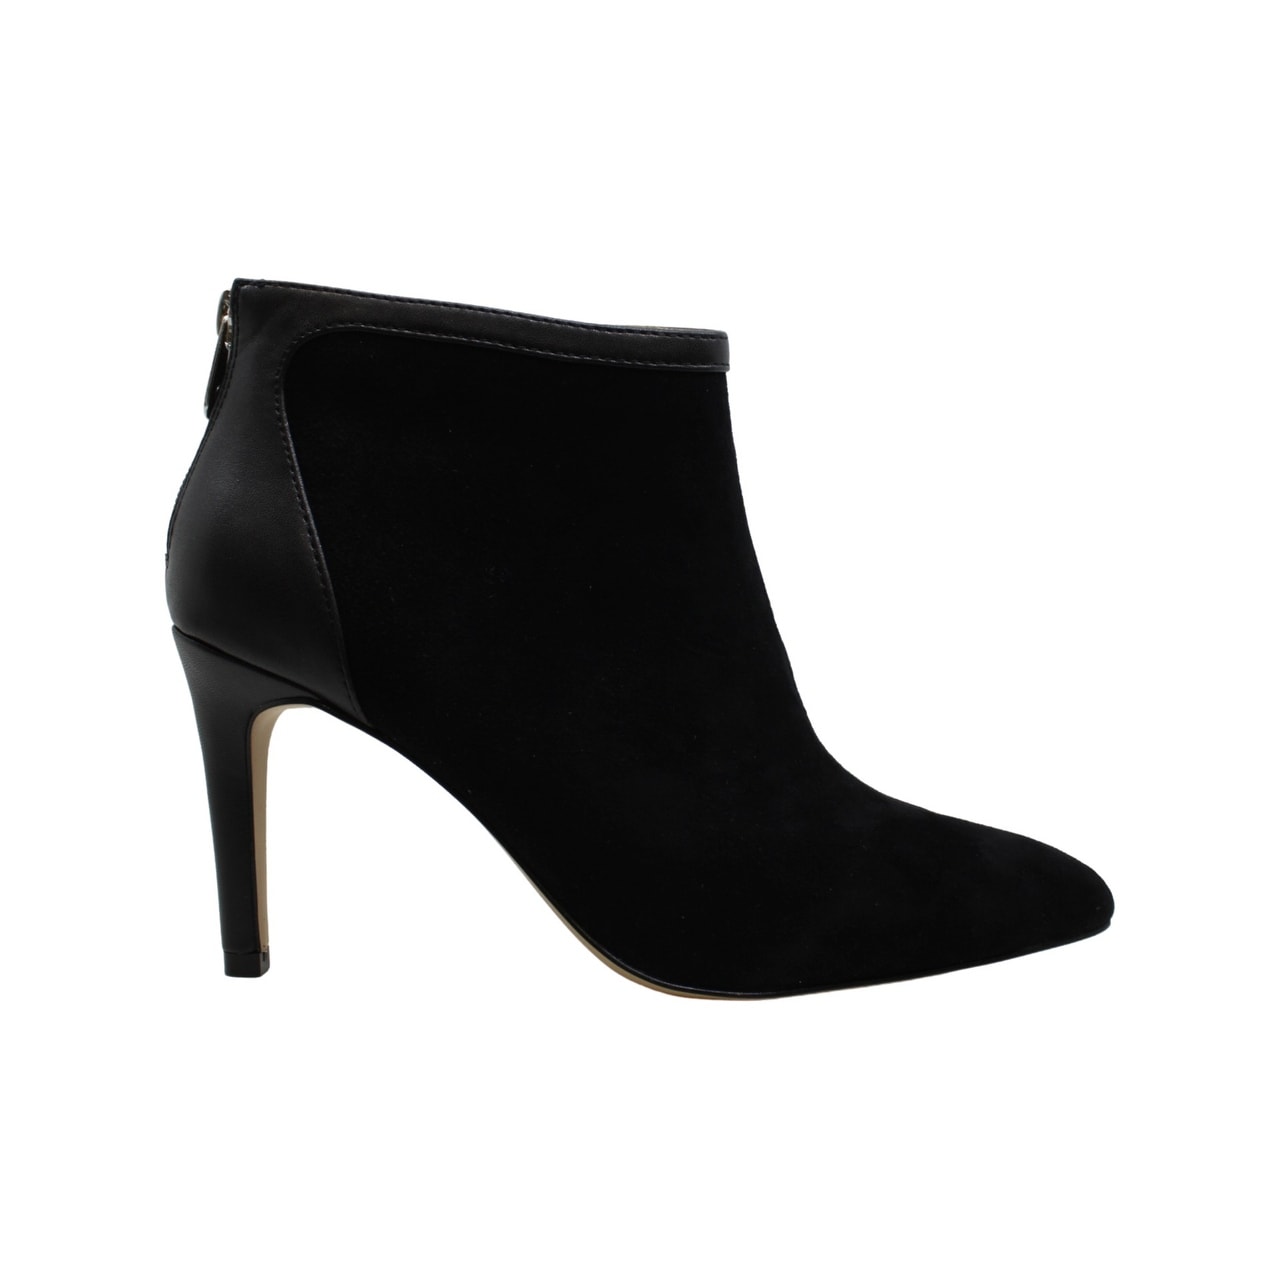 adrienne vittadini suede boots